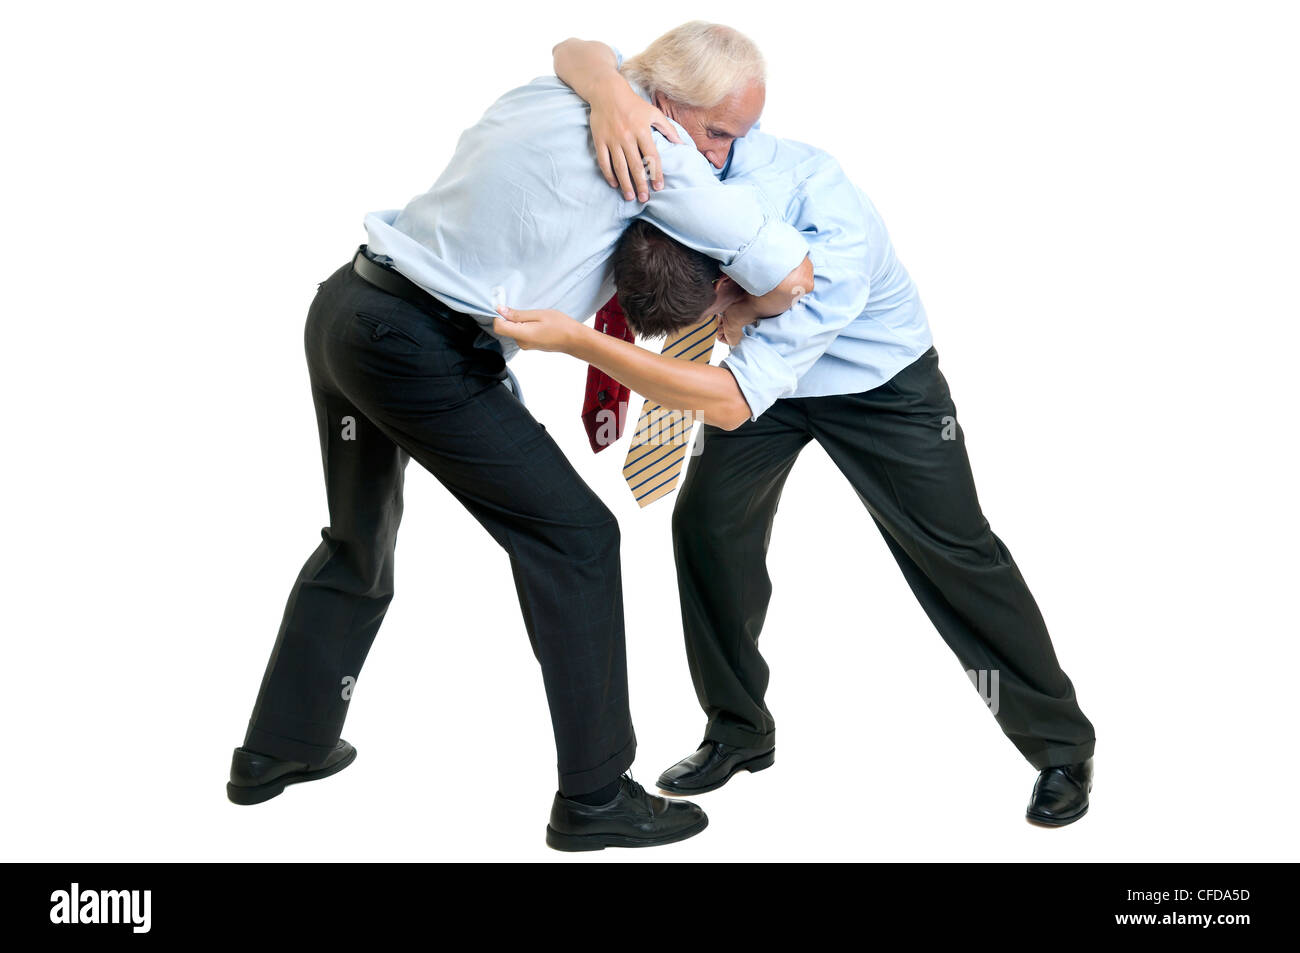 To businessmen wrestling isolated against a white background Stock Photo